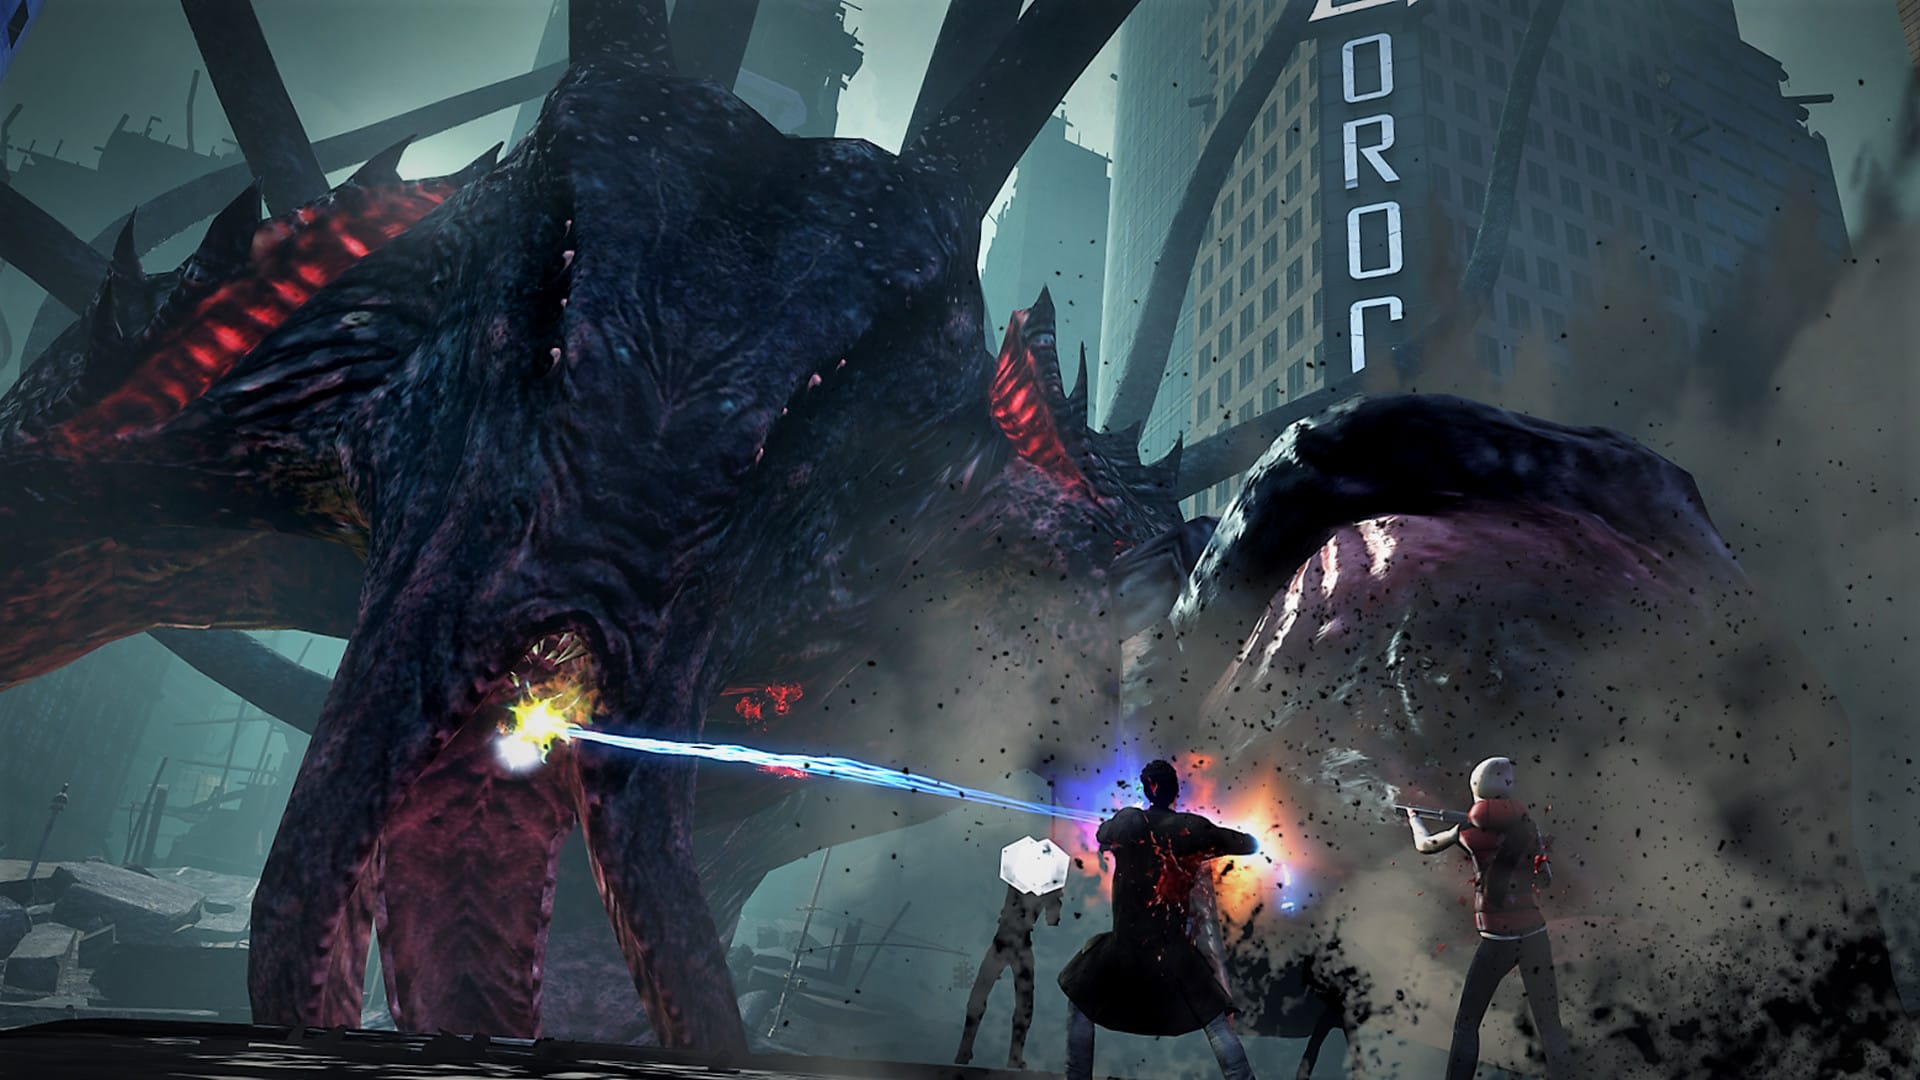 Best MMORPG games: Secret World Legends. Image shows a group of people fighting against an enormous monster.